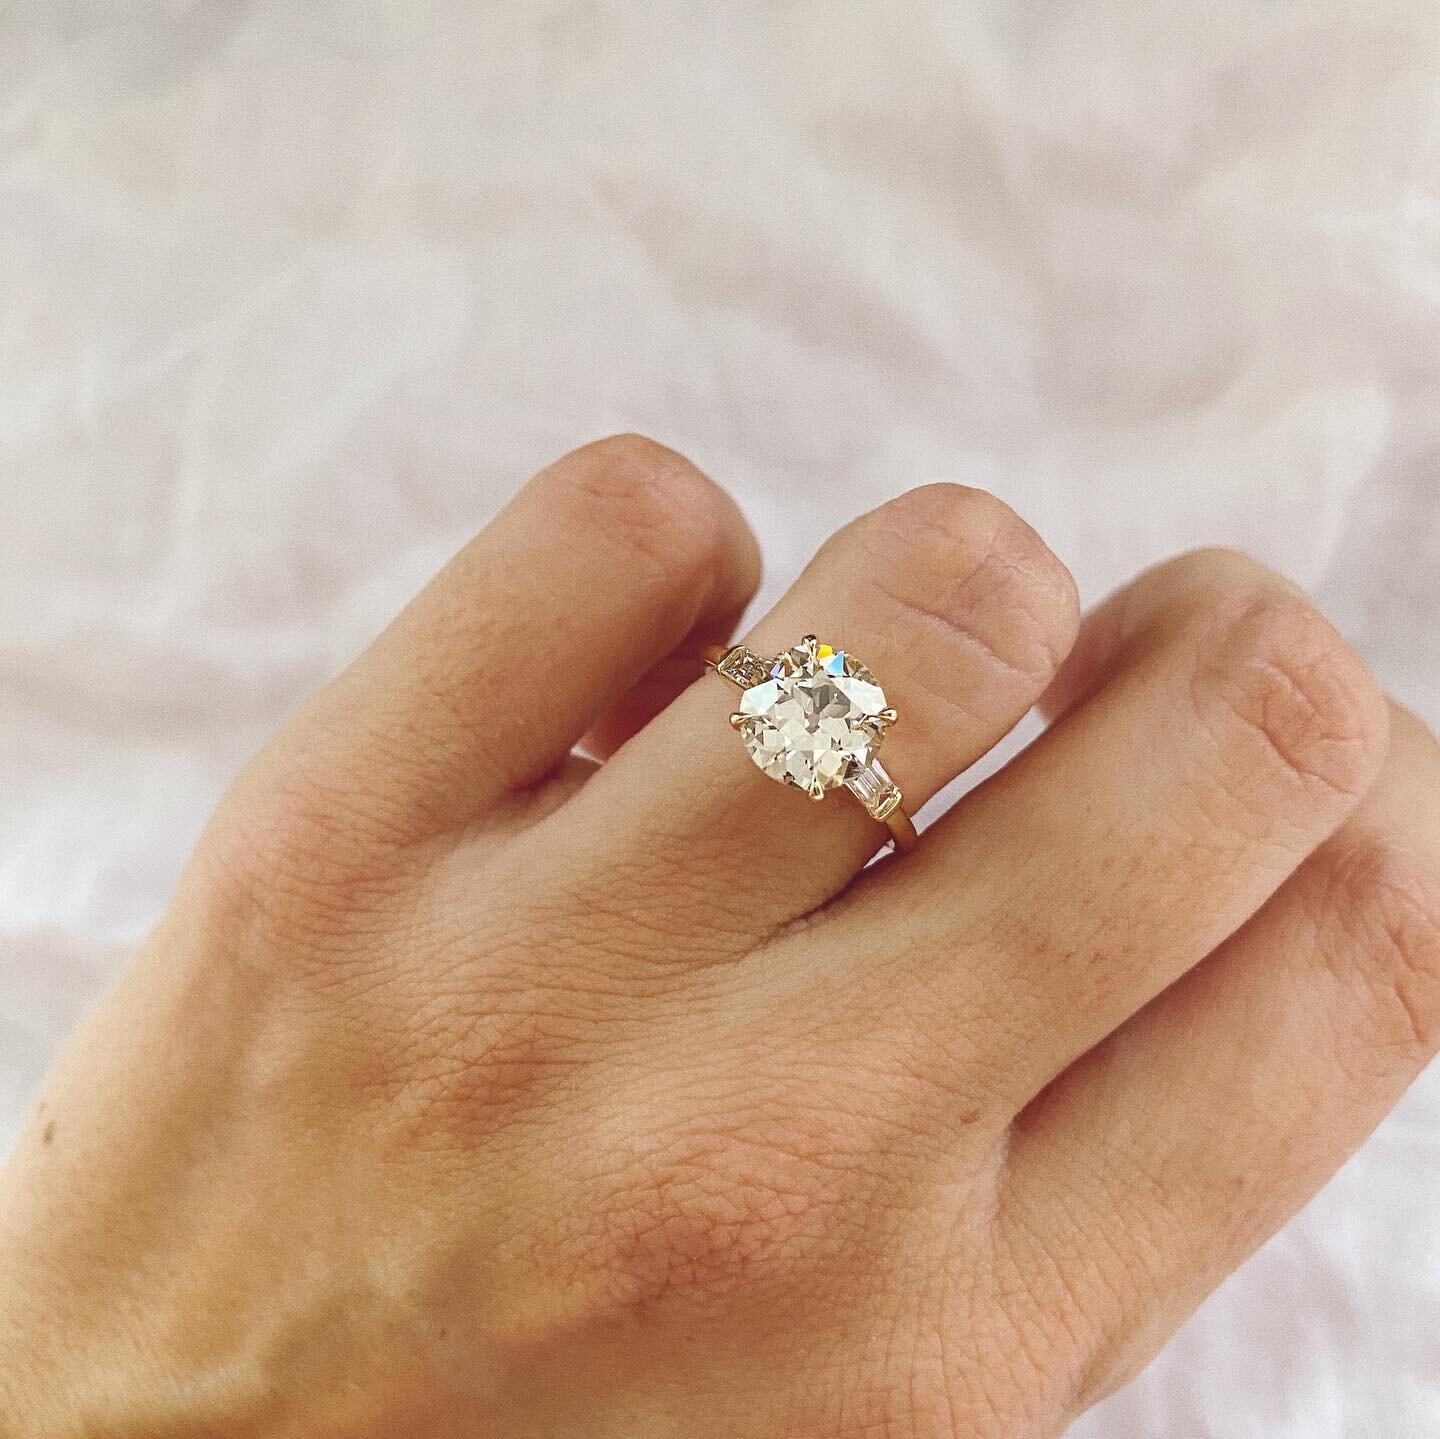 One word came to mind when I saw this ring IRL for the first time - 🌹Romantic🌹 It could be the UNREAL antique Old European diamond center stone or the nod to Art Deco jewelry with the straight baguettes, but one thing&rsquo;s for sure: this ring is